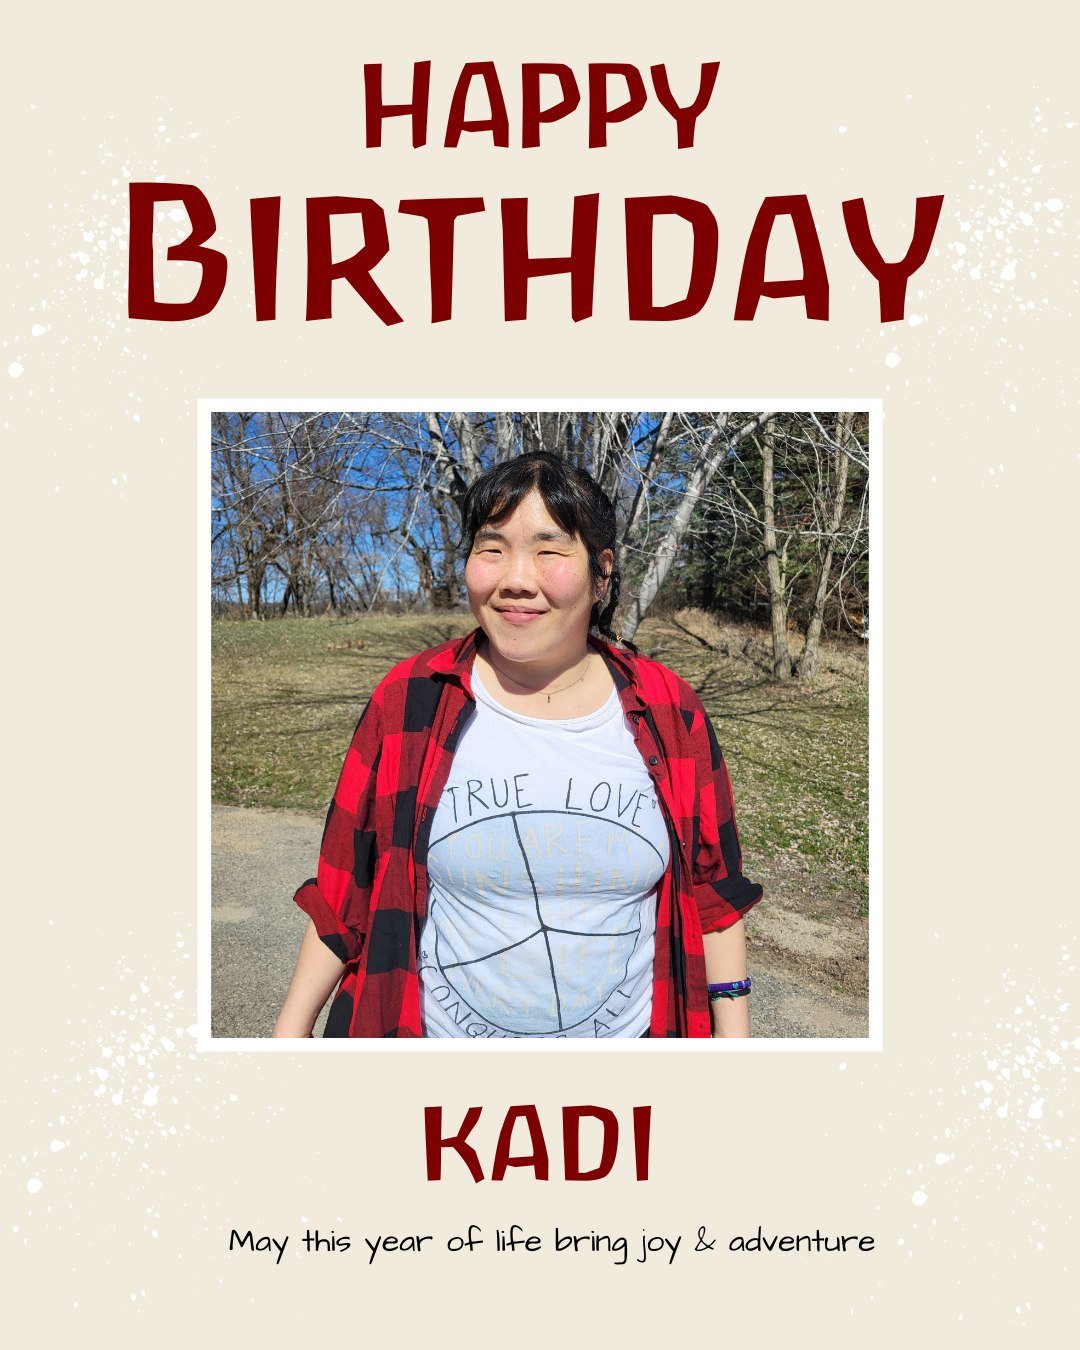 Happy Birthday Kadi!! 

Kadi started celebrating last Friday when her sisters picked her up for a weekend. 
Monday night they celebrated at Aurora house and today she works and then Caleb will make her a nice supper. 

It's always so fun to celebrate